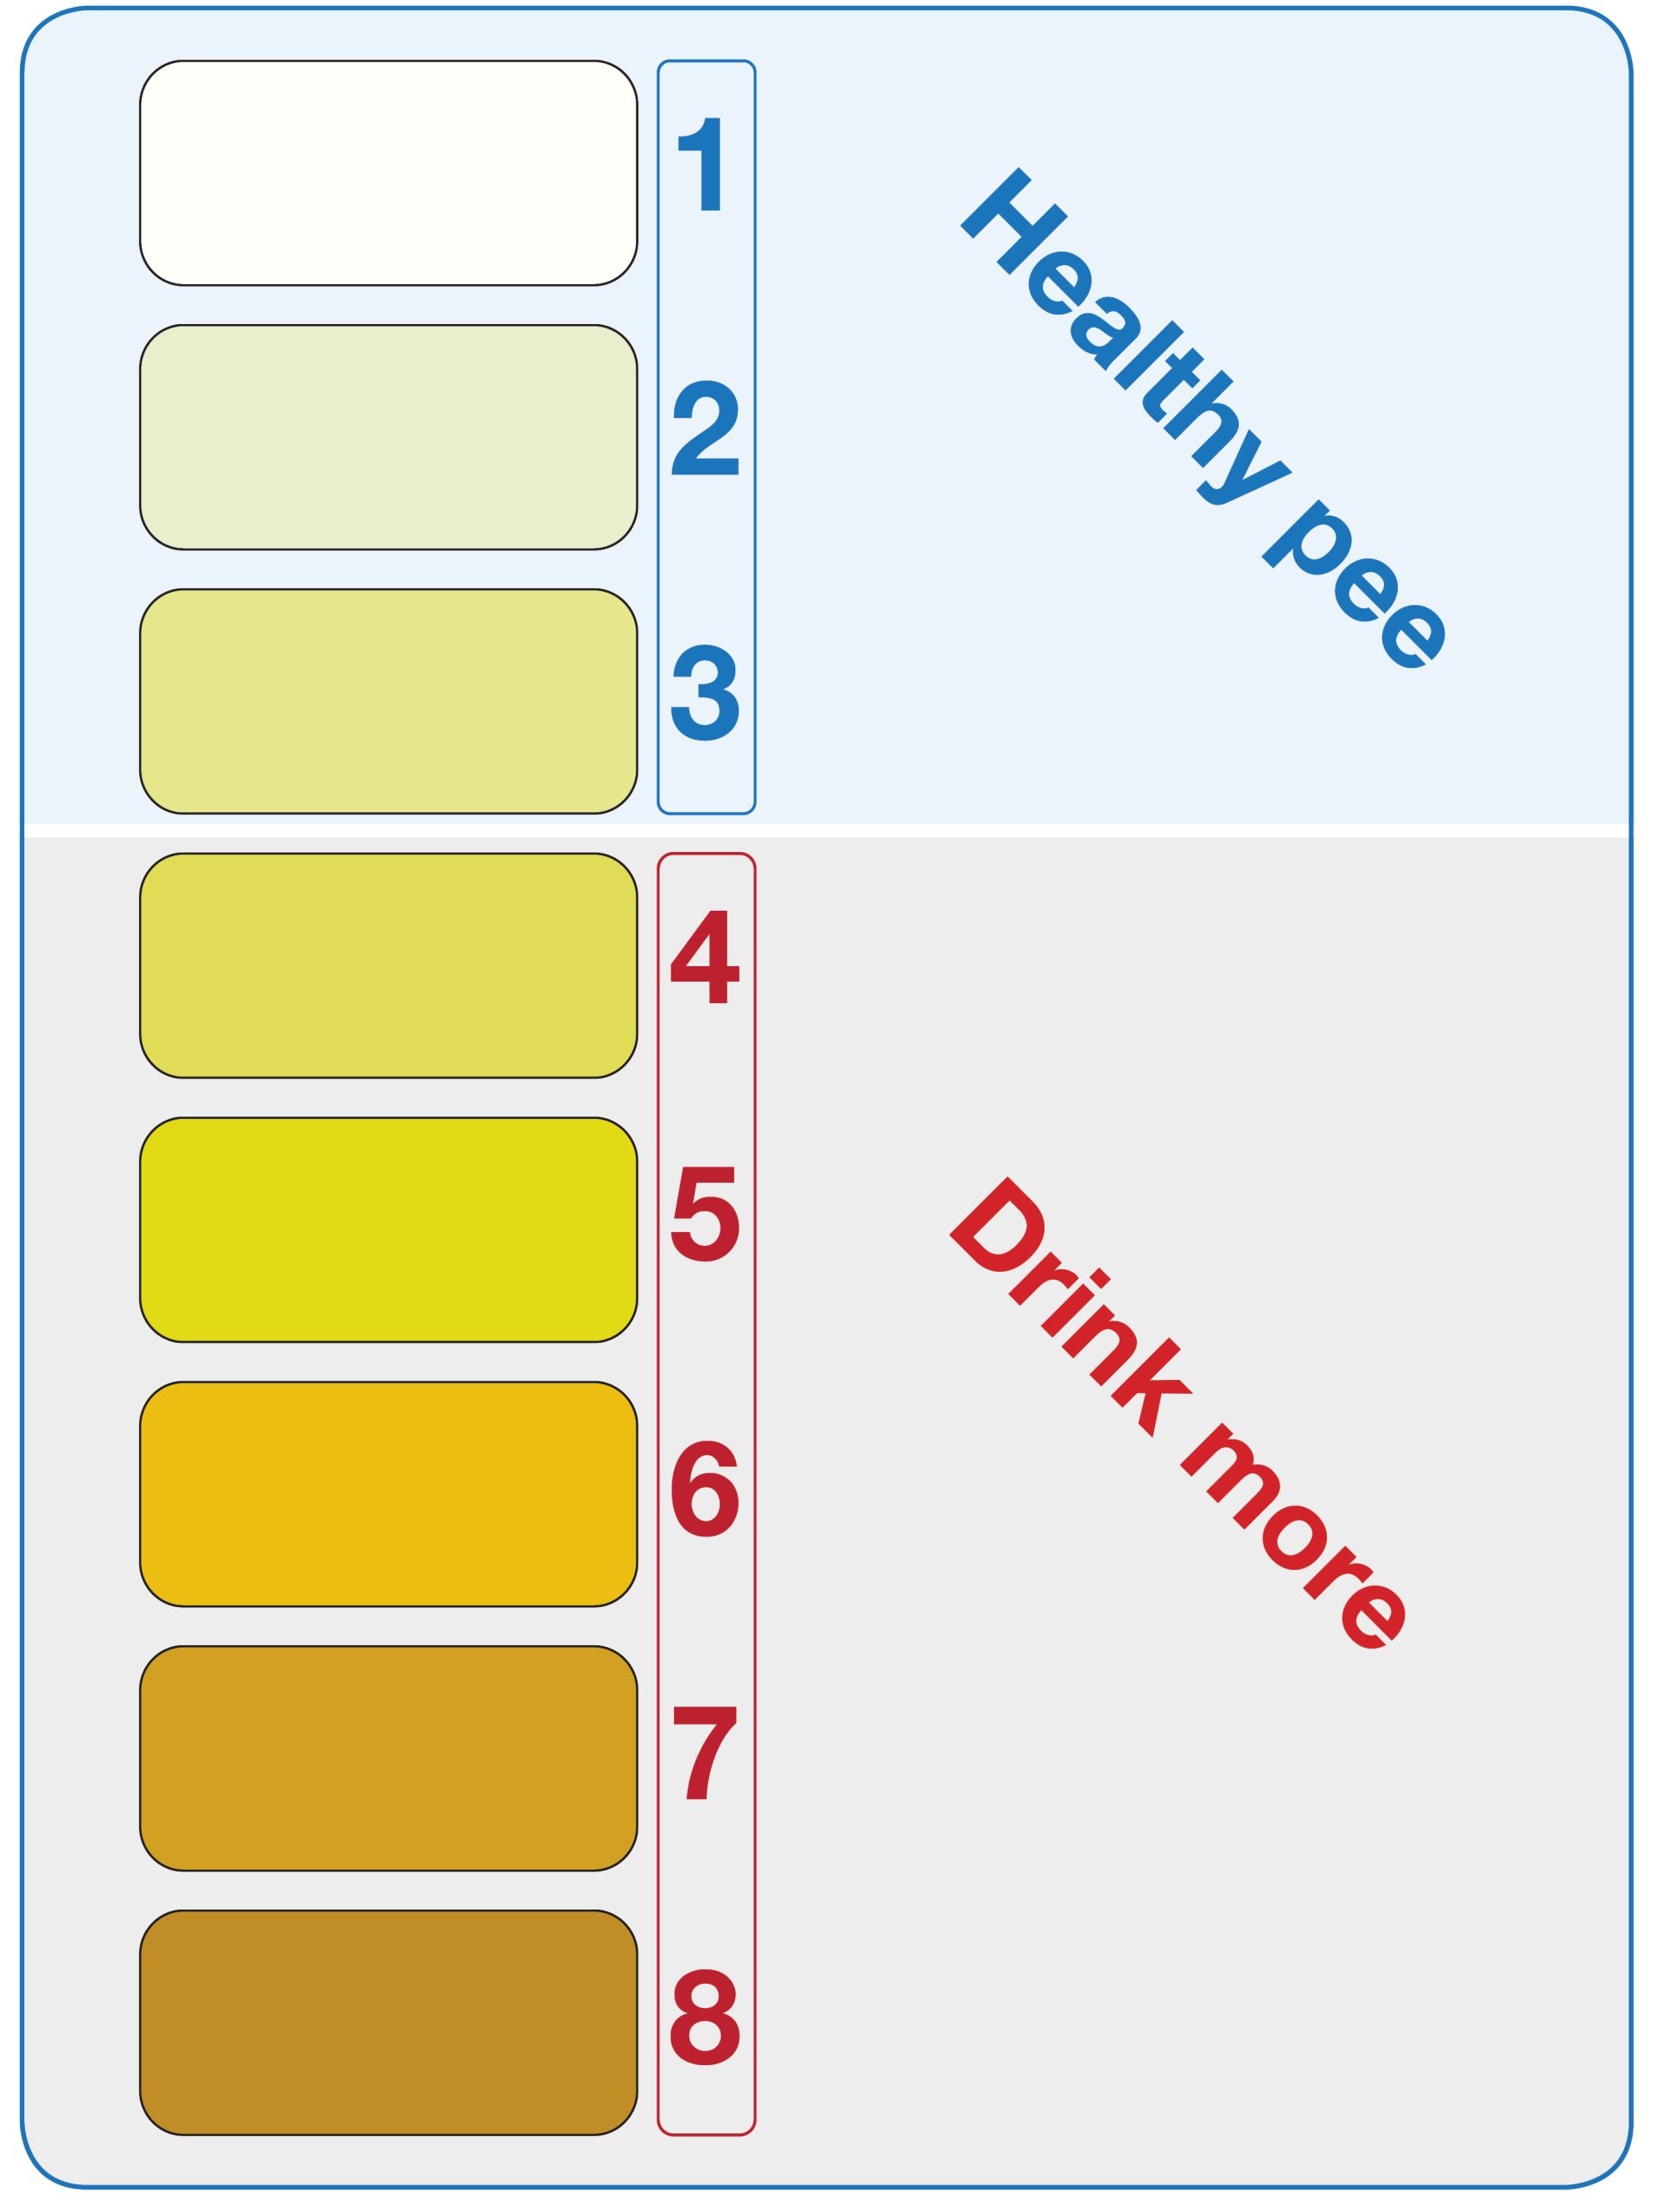 Could Your Urine Color be a COVID-19 Symptom? 